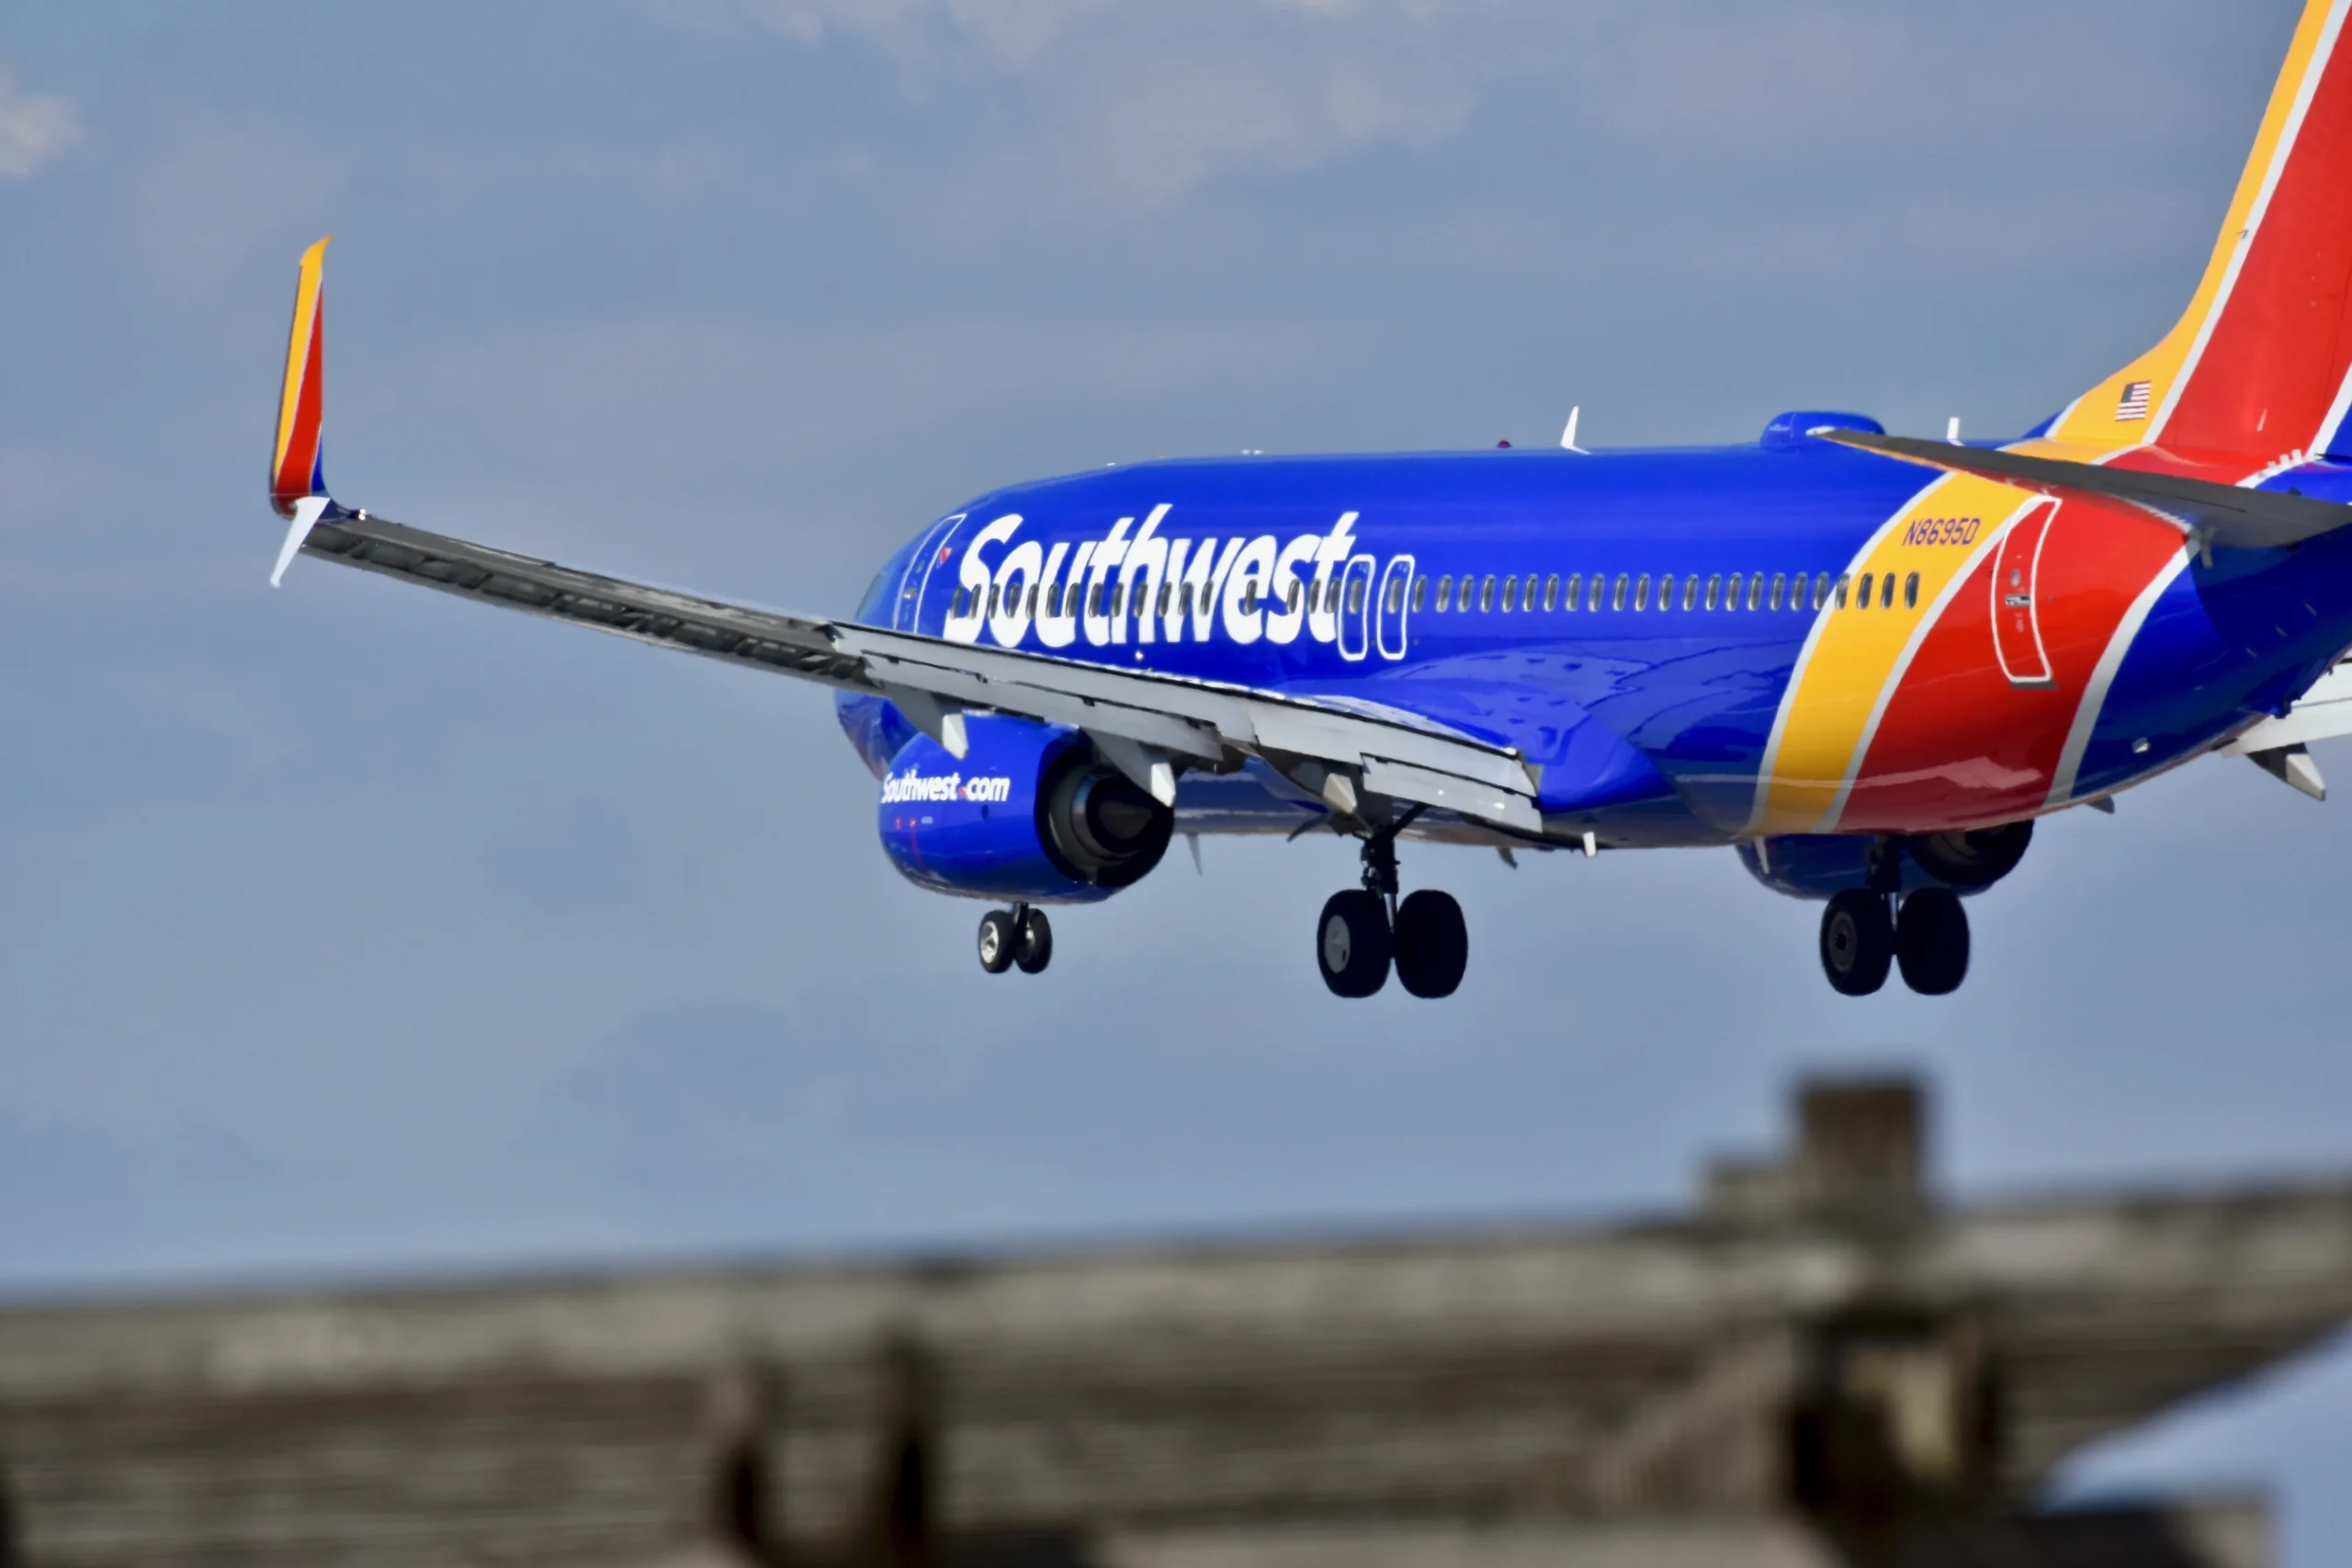 Boeing Delivery Delays Impact Southwest Pilots with Reduced